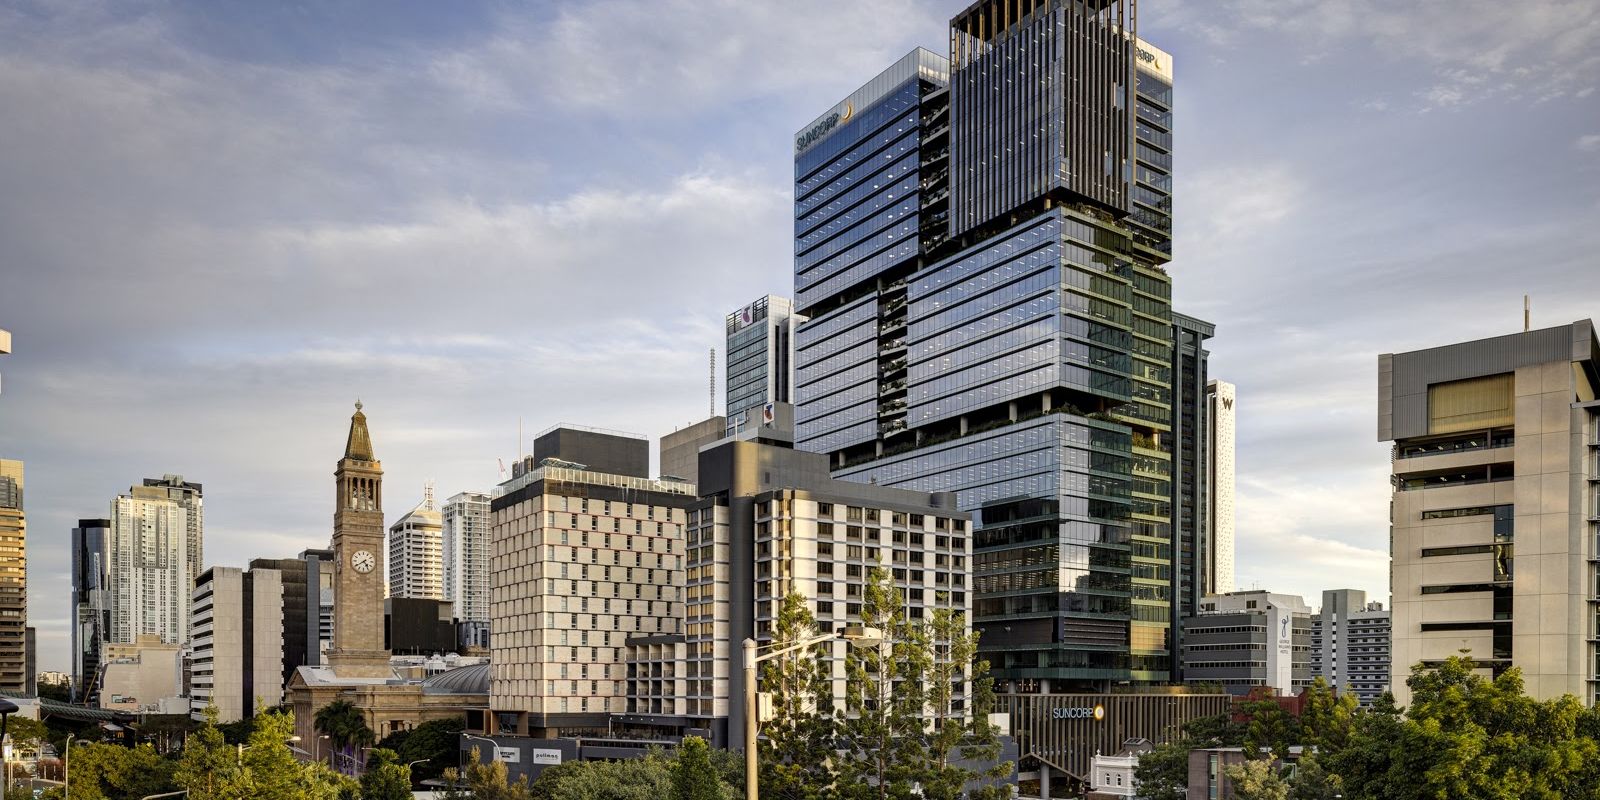 Heritage Lanes named Brisbane’s top workplace as hybrid work changes the role of the “office”